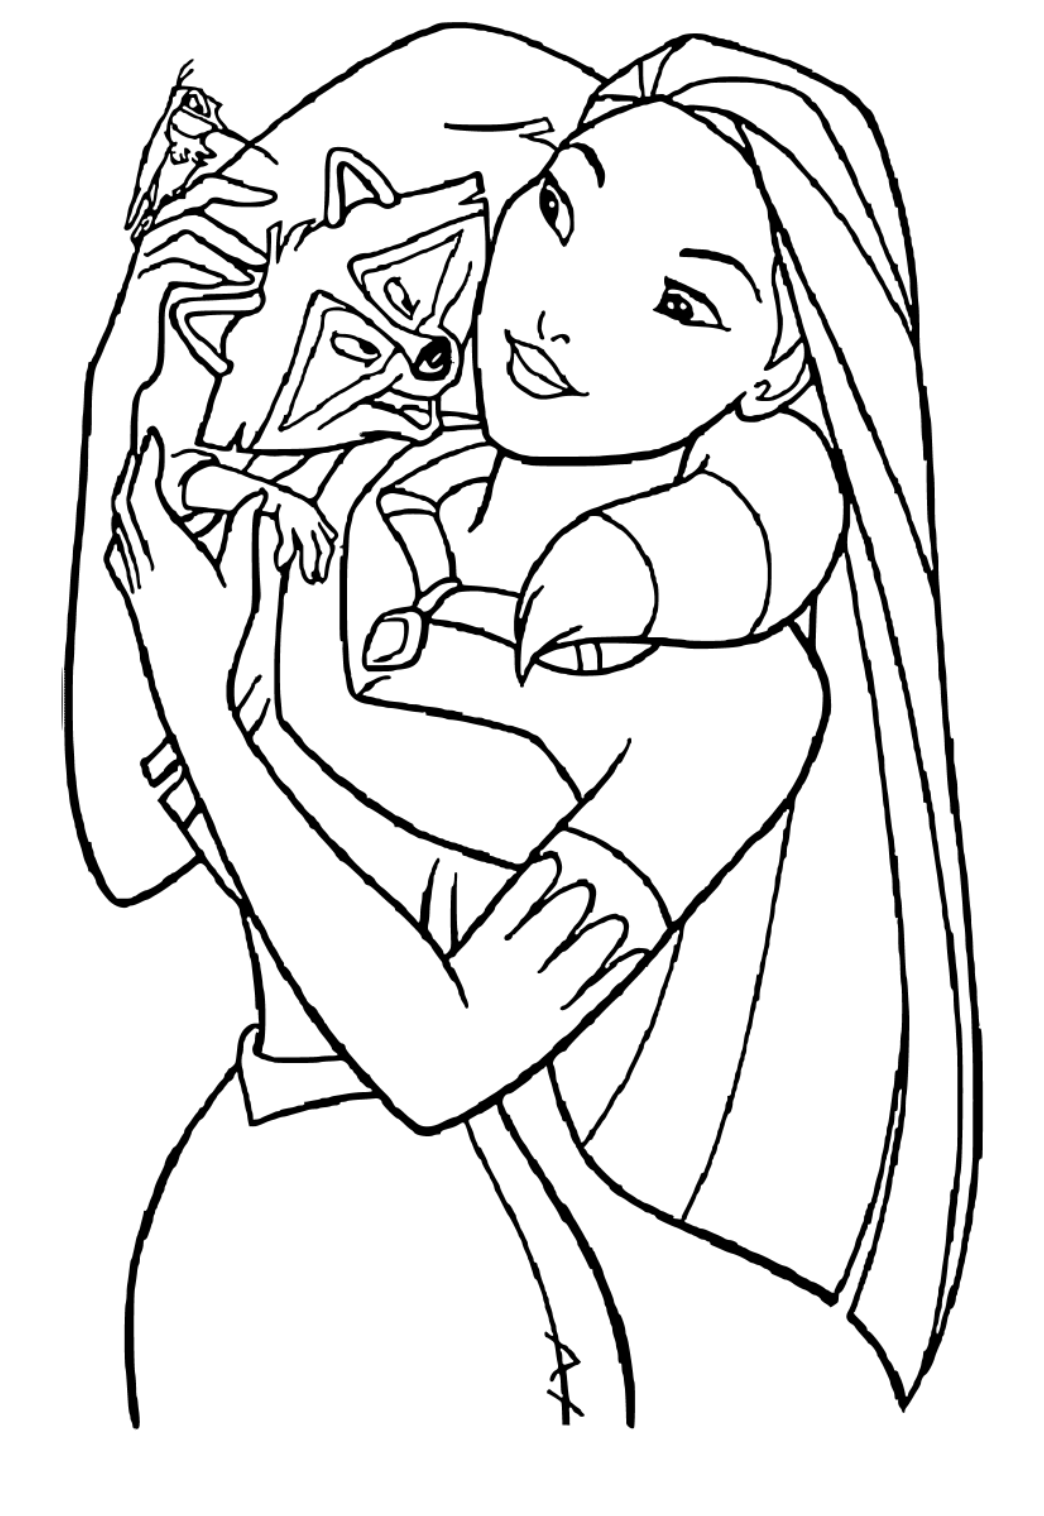 Free Printable Pocahontas Raccoon Coloring Page for Adults and Kids ...